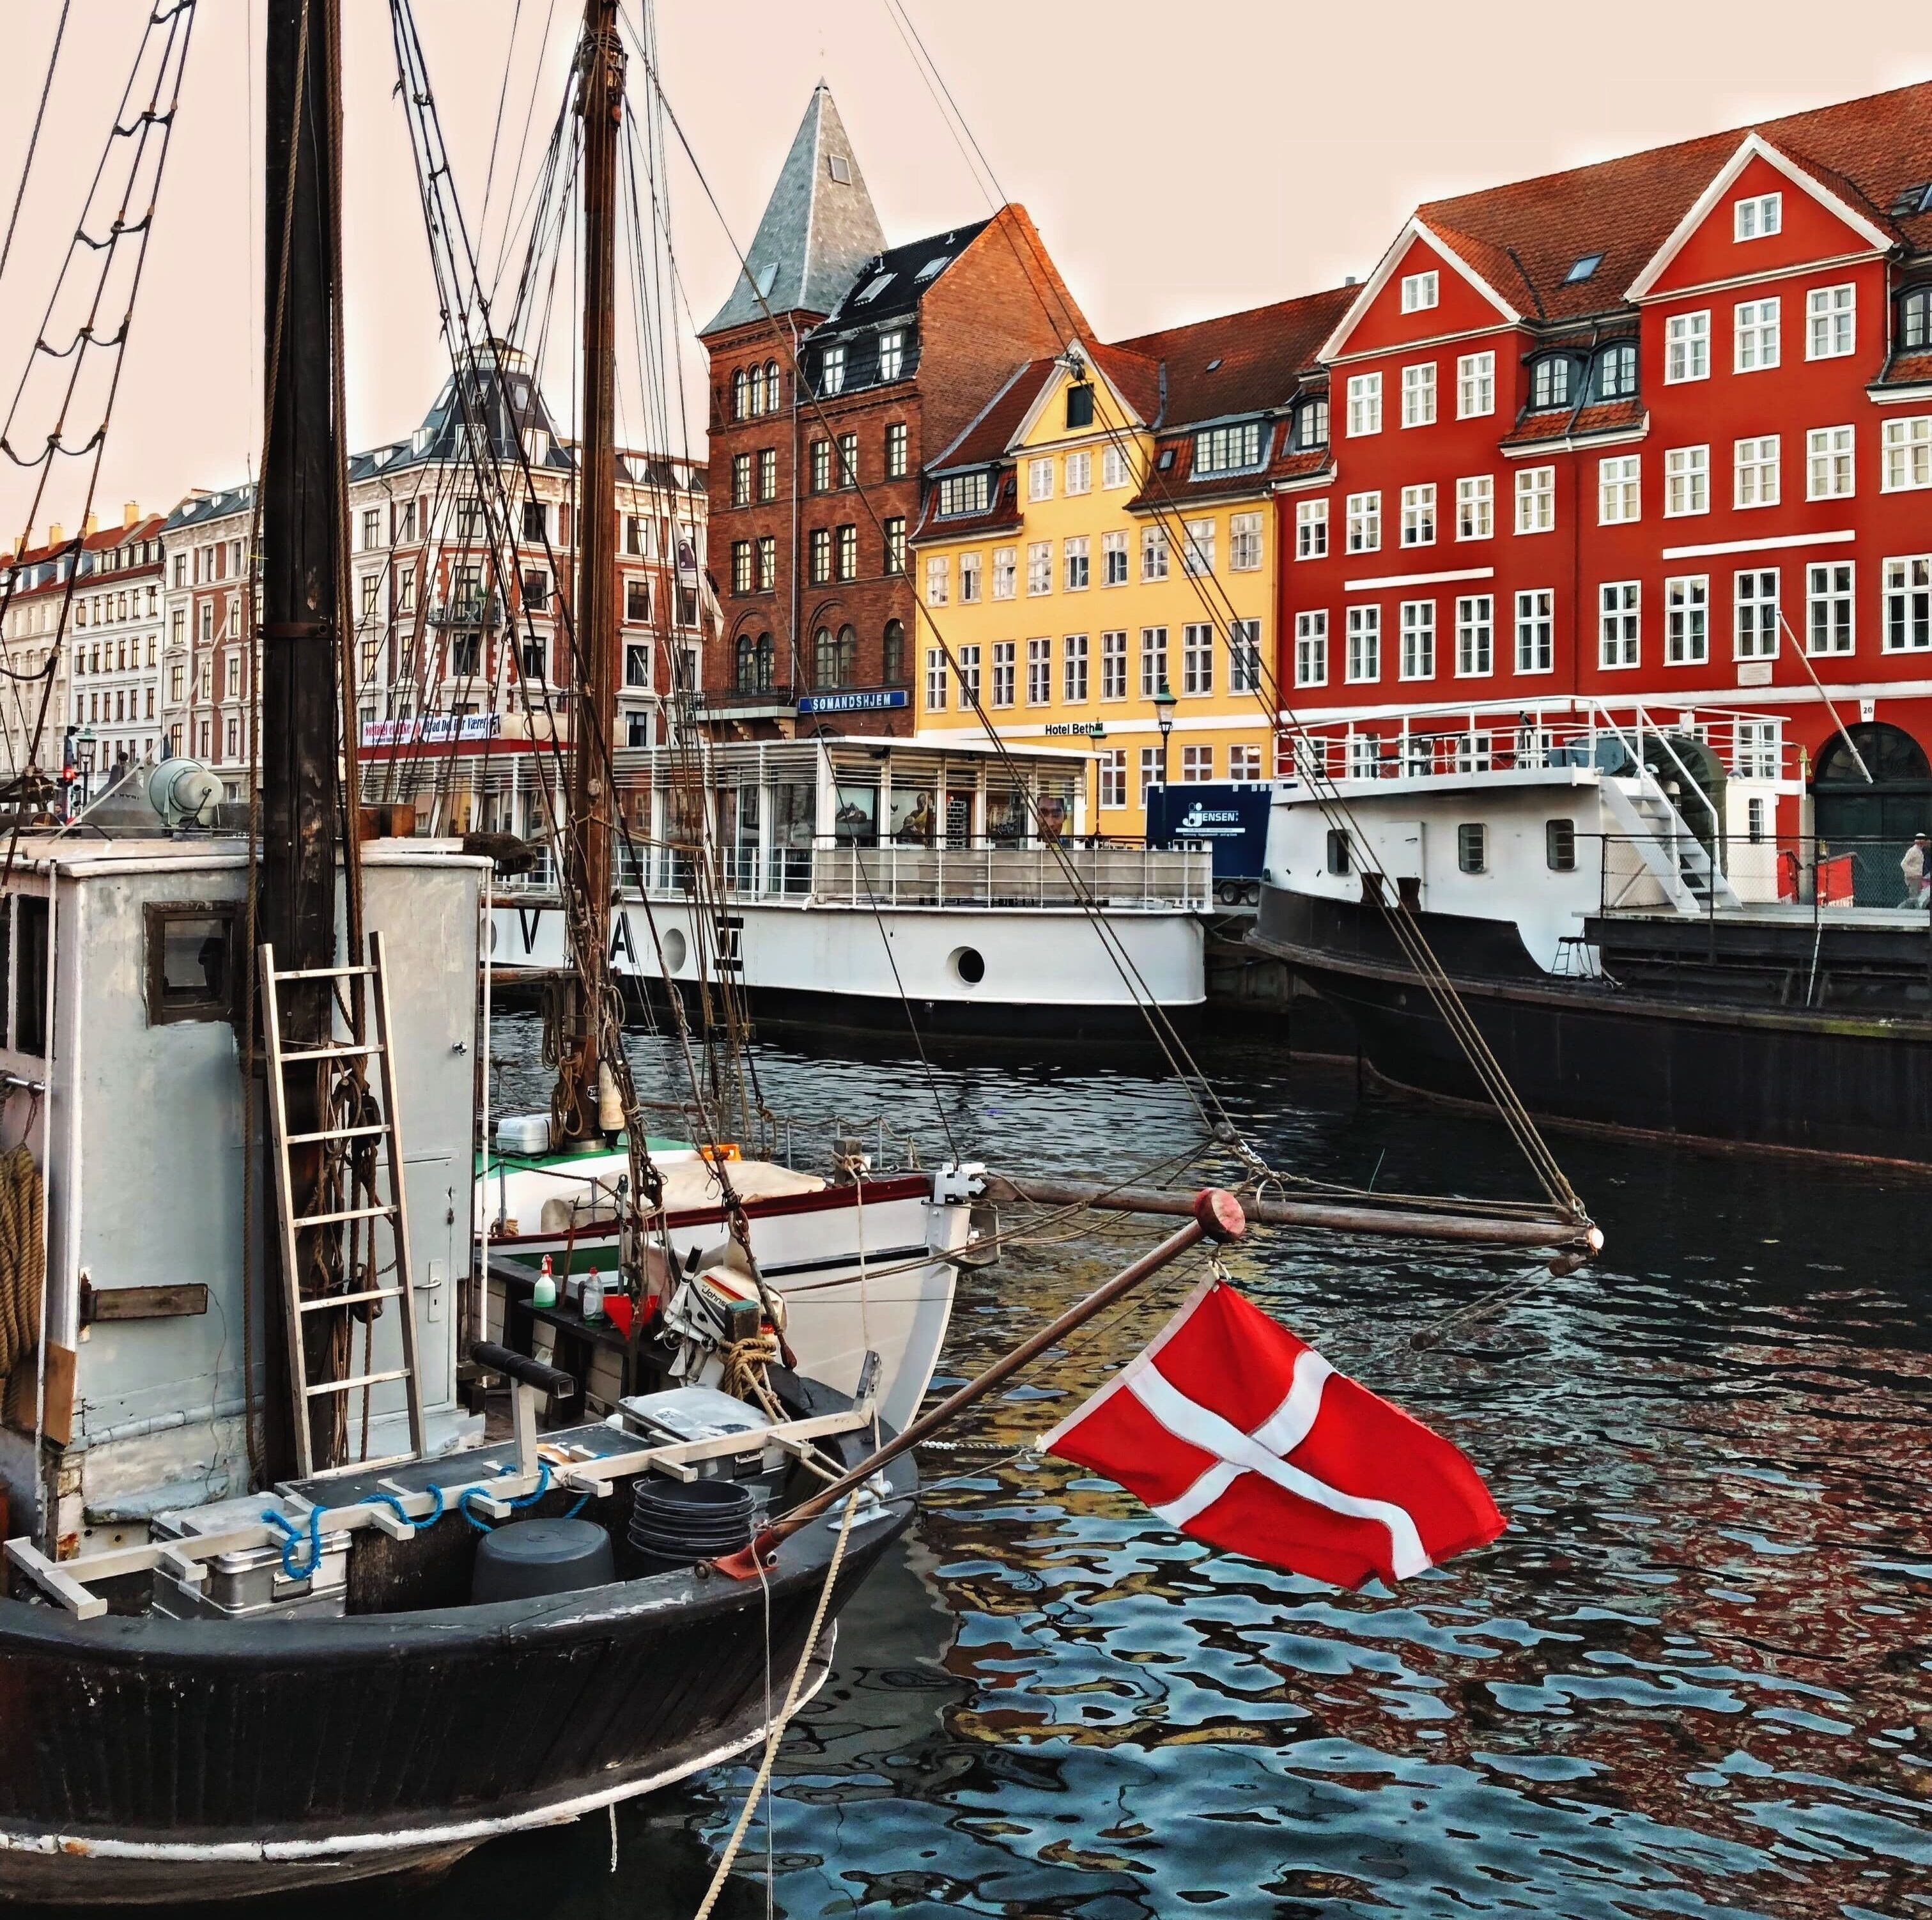 get to know more information about au pairing or our au pair program and visit the Denmark as an au pair